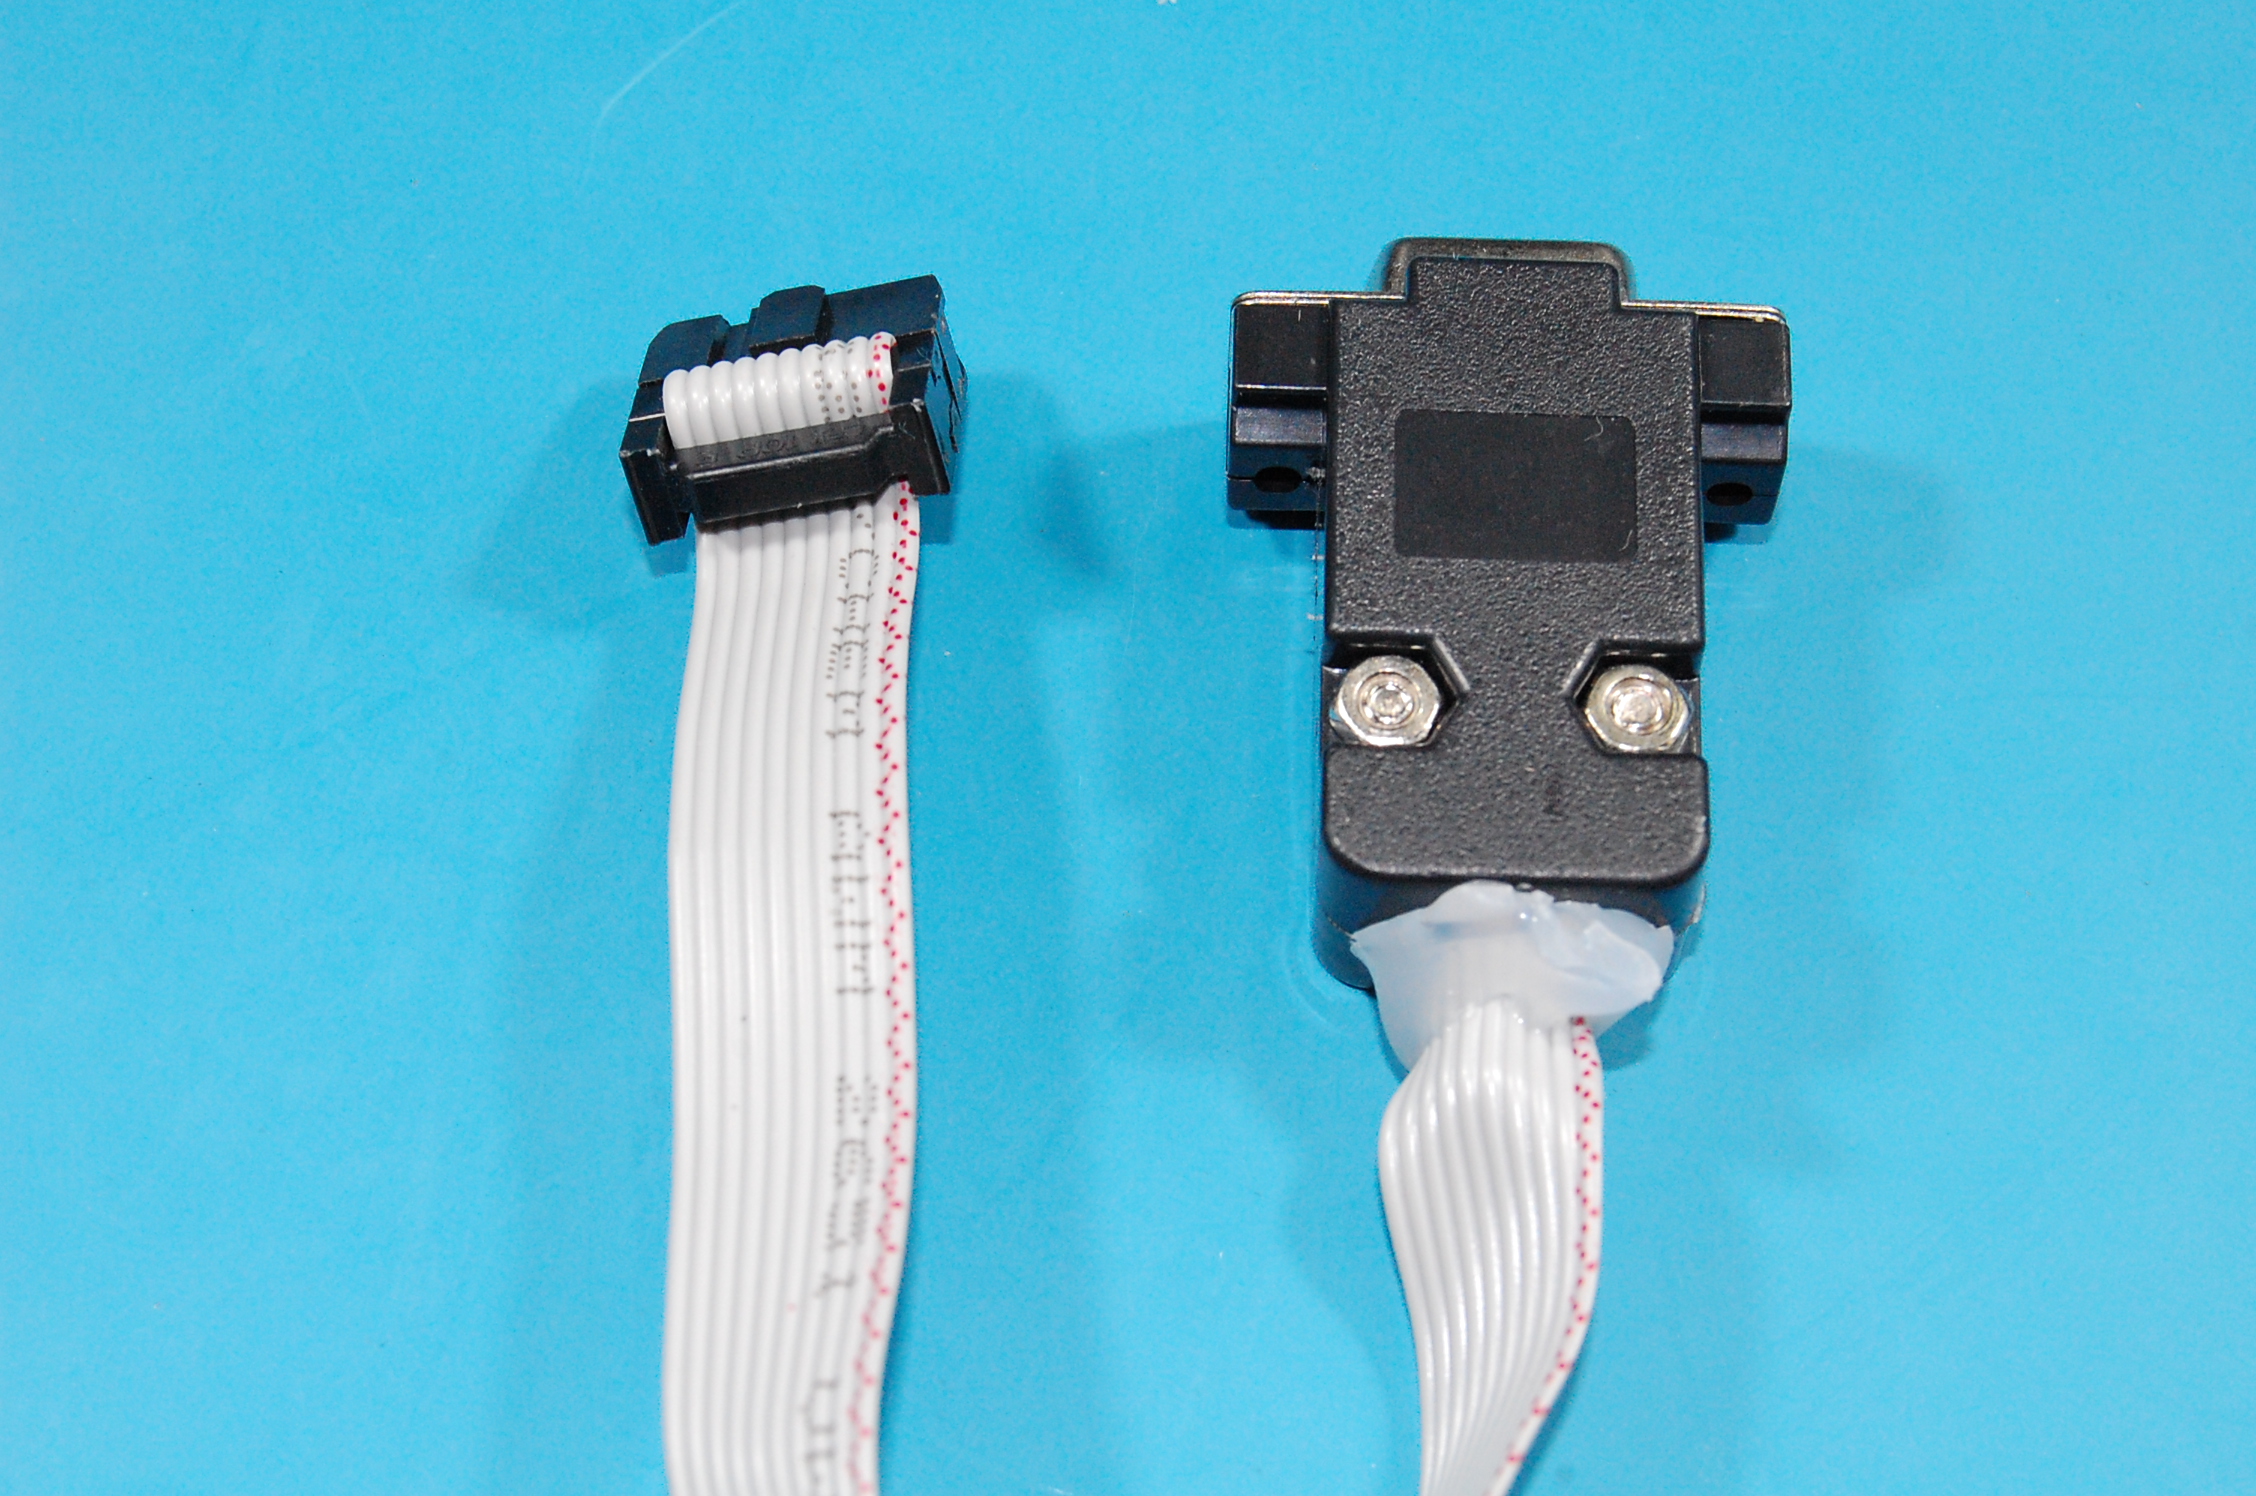 Assembled adapter cable